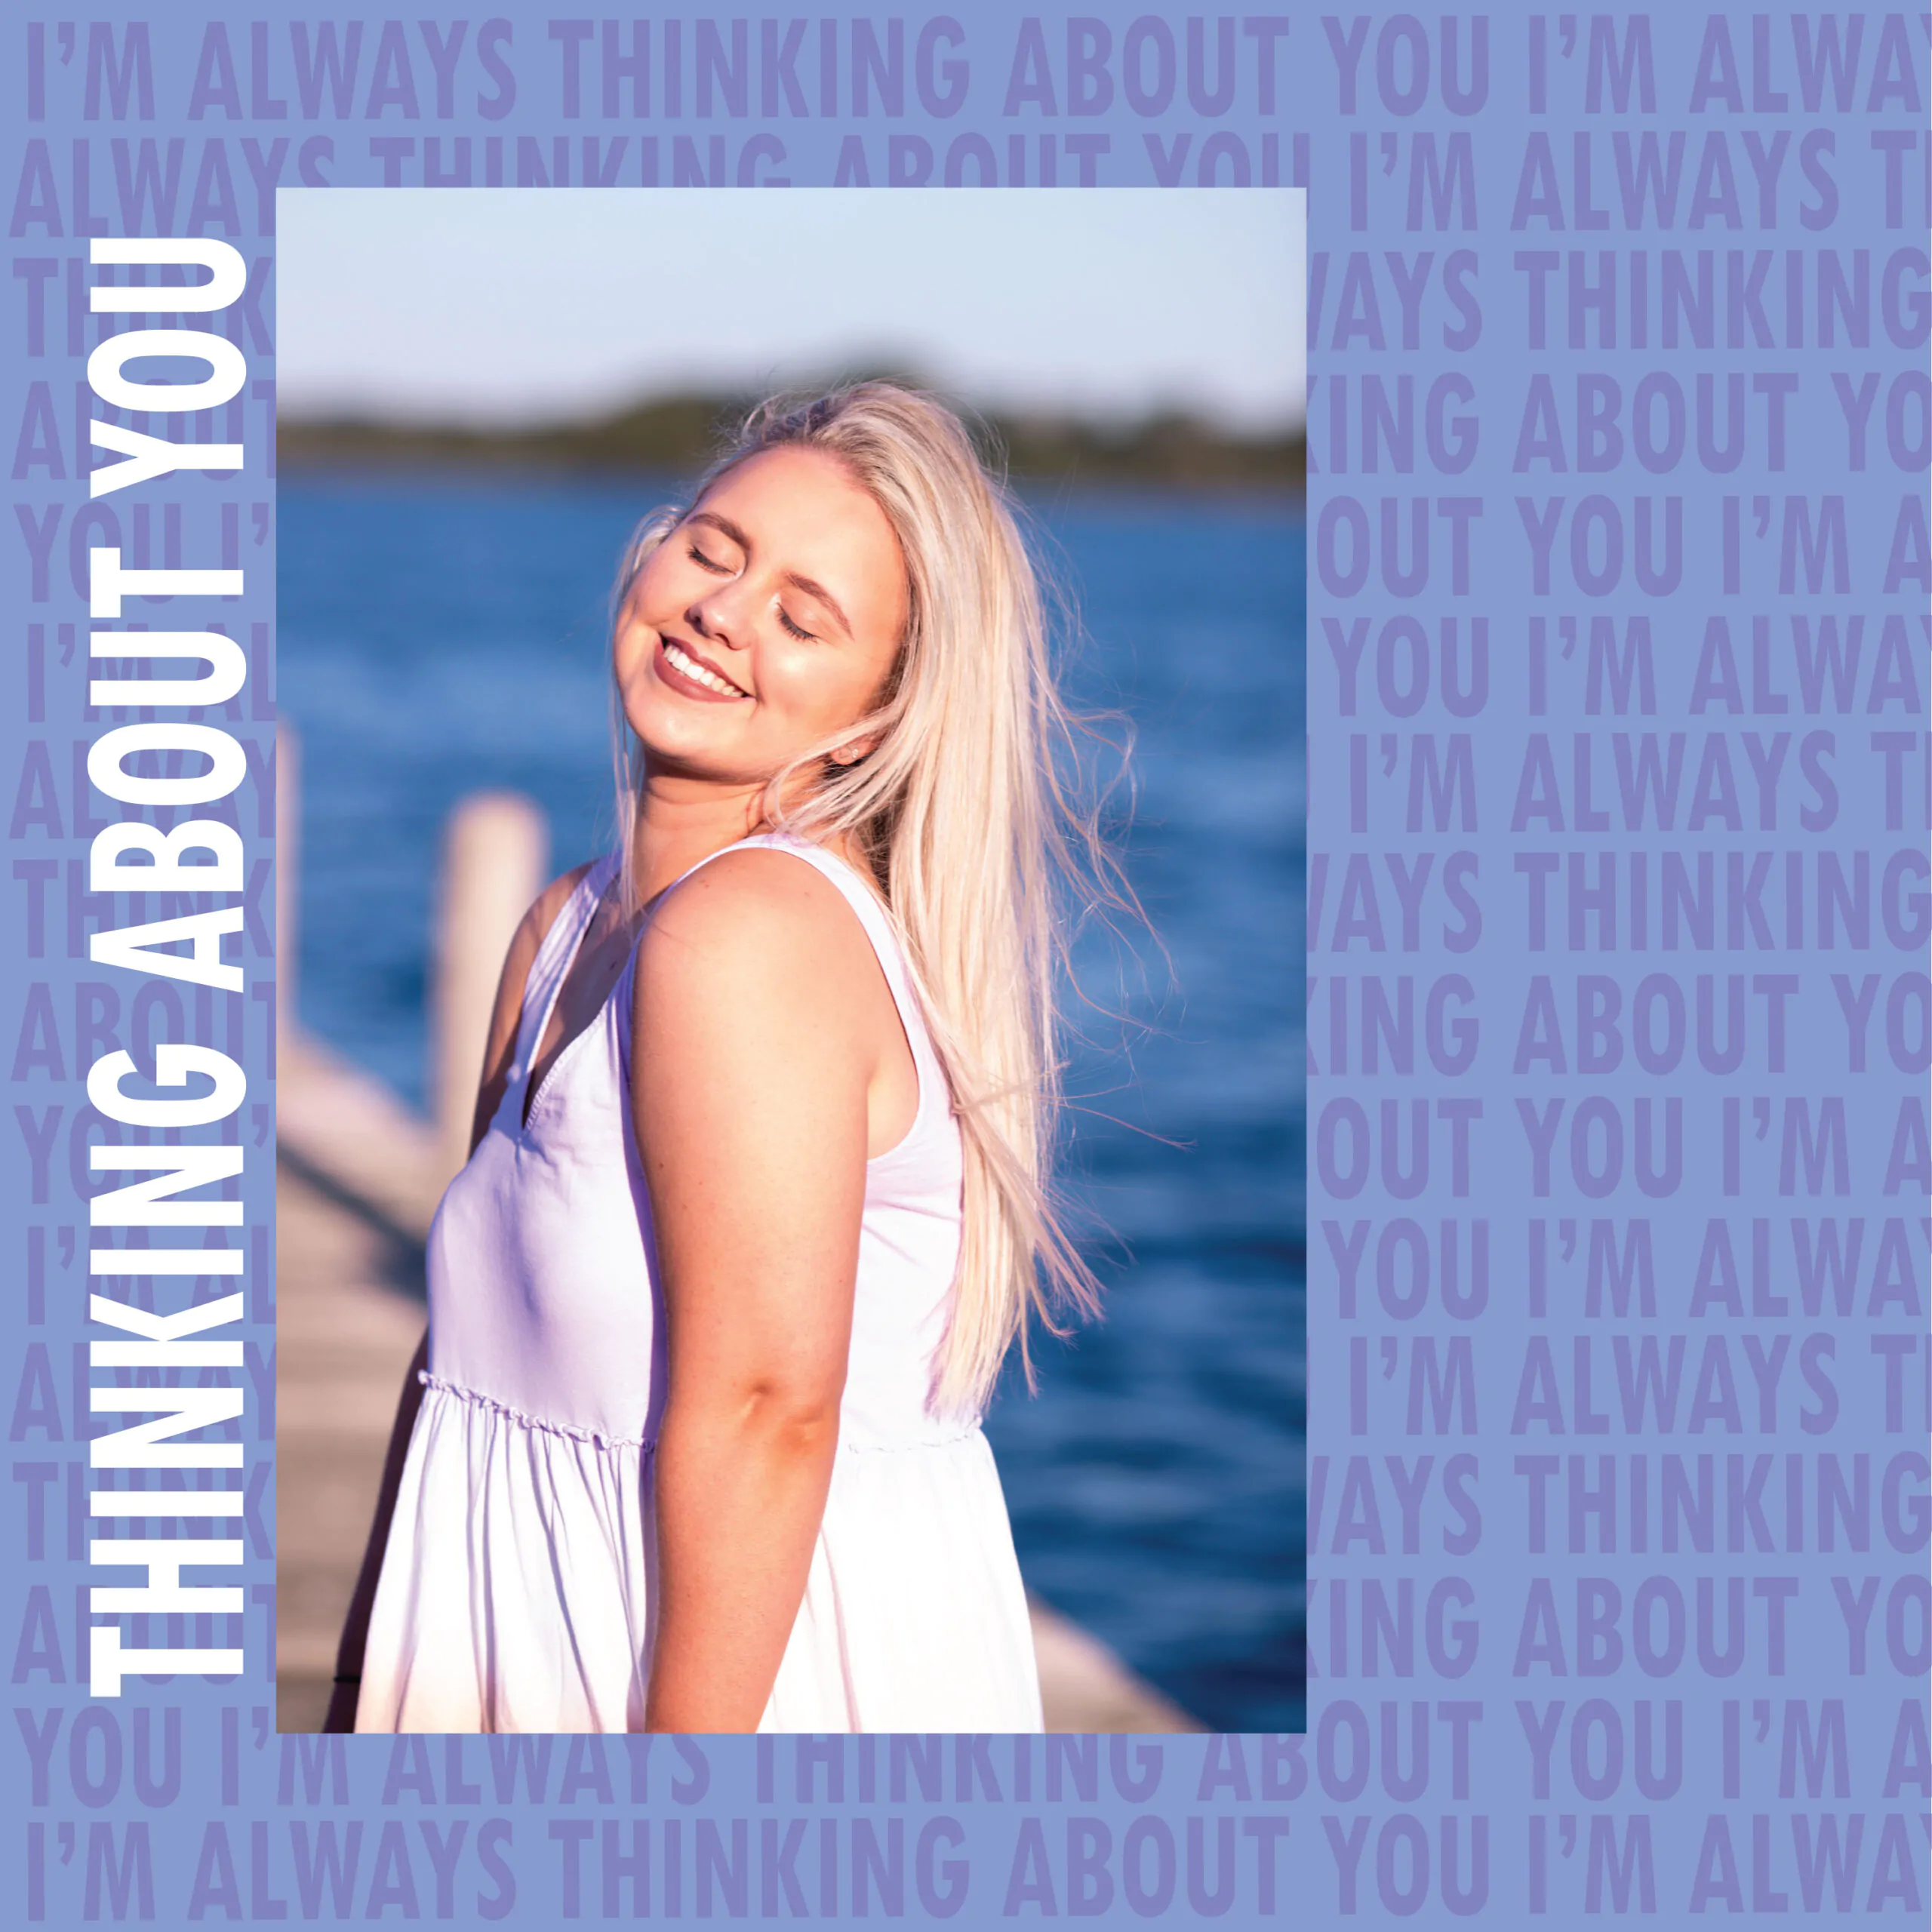 EMMA HORAN releases new single ‘Thinking About You’ today – Listen Now!